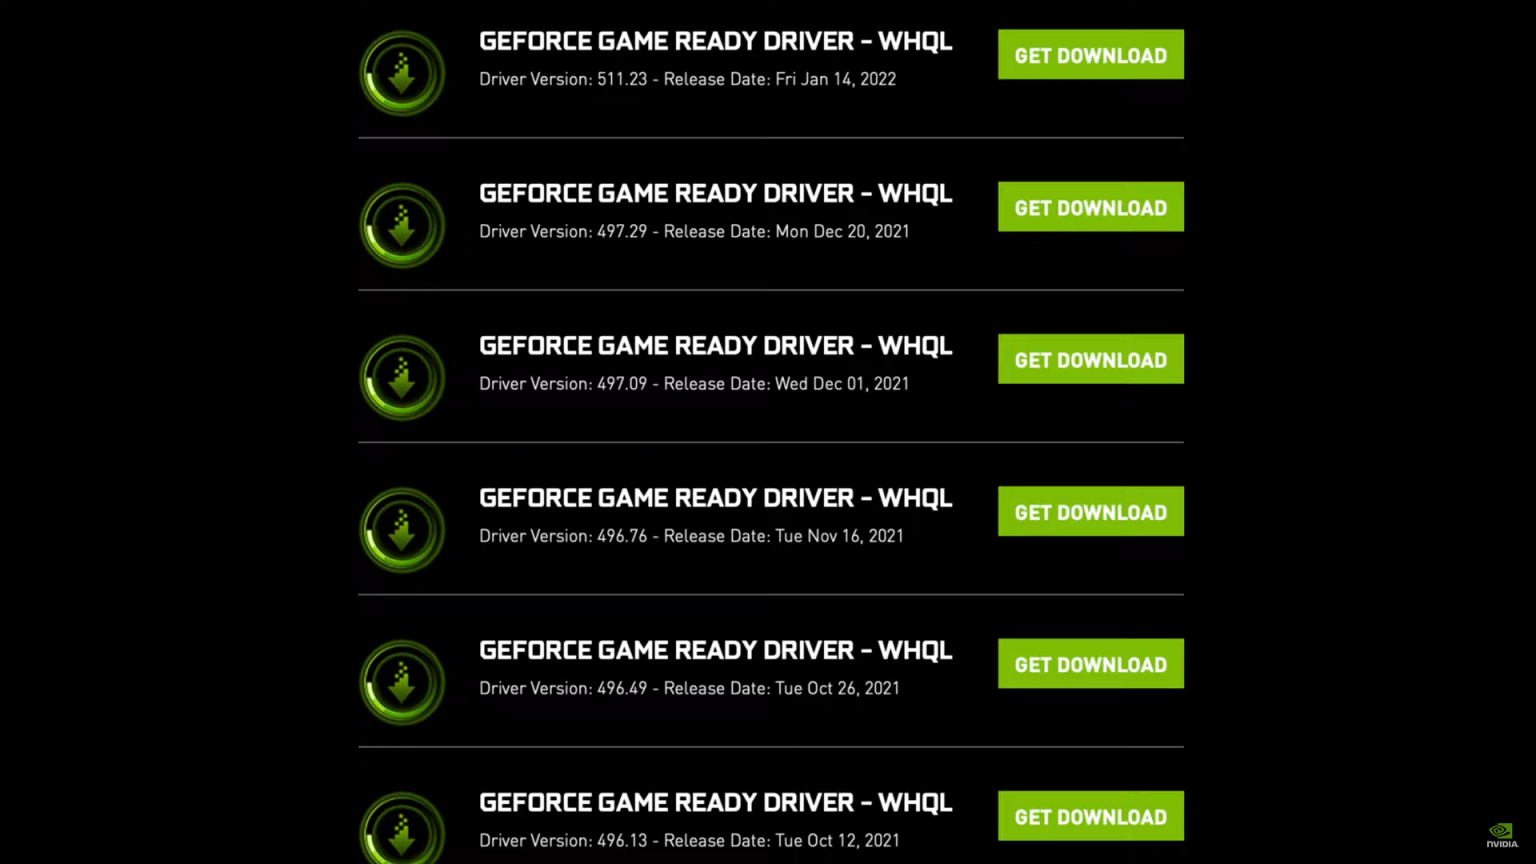 Game ready whql. GEFORCE game ready. Game ready Driver NVIDIA. Драйвер гейм реди. NVIDIA game ready.